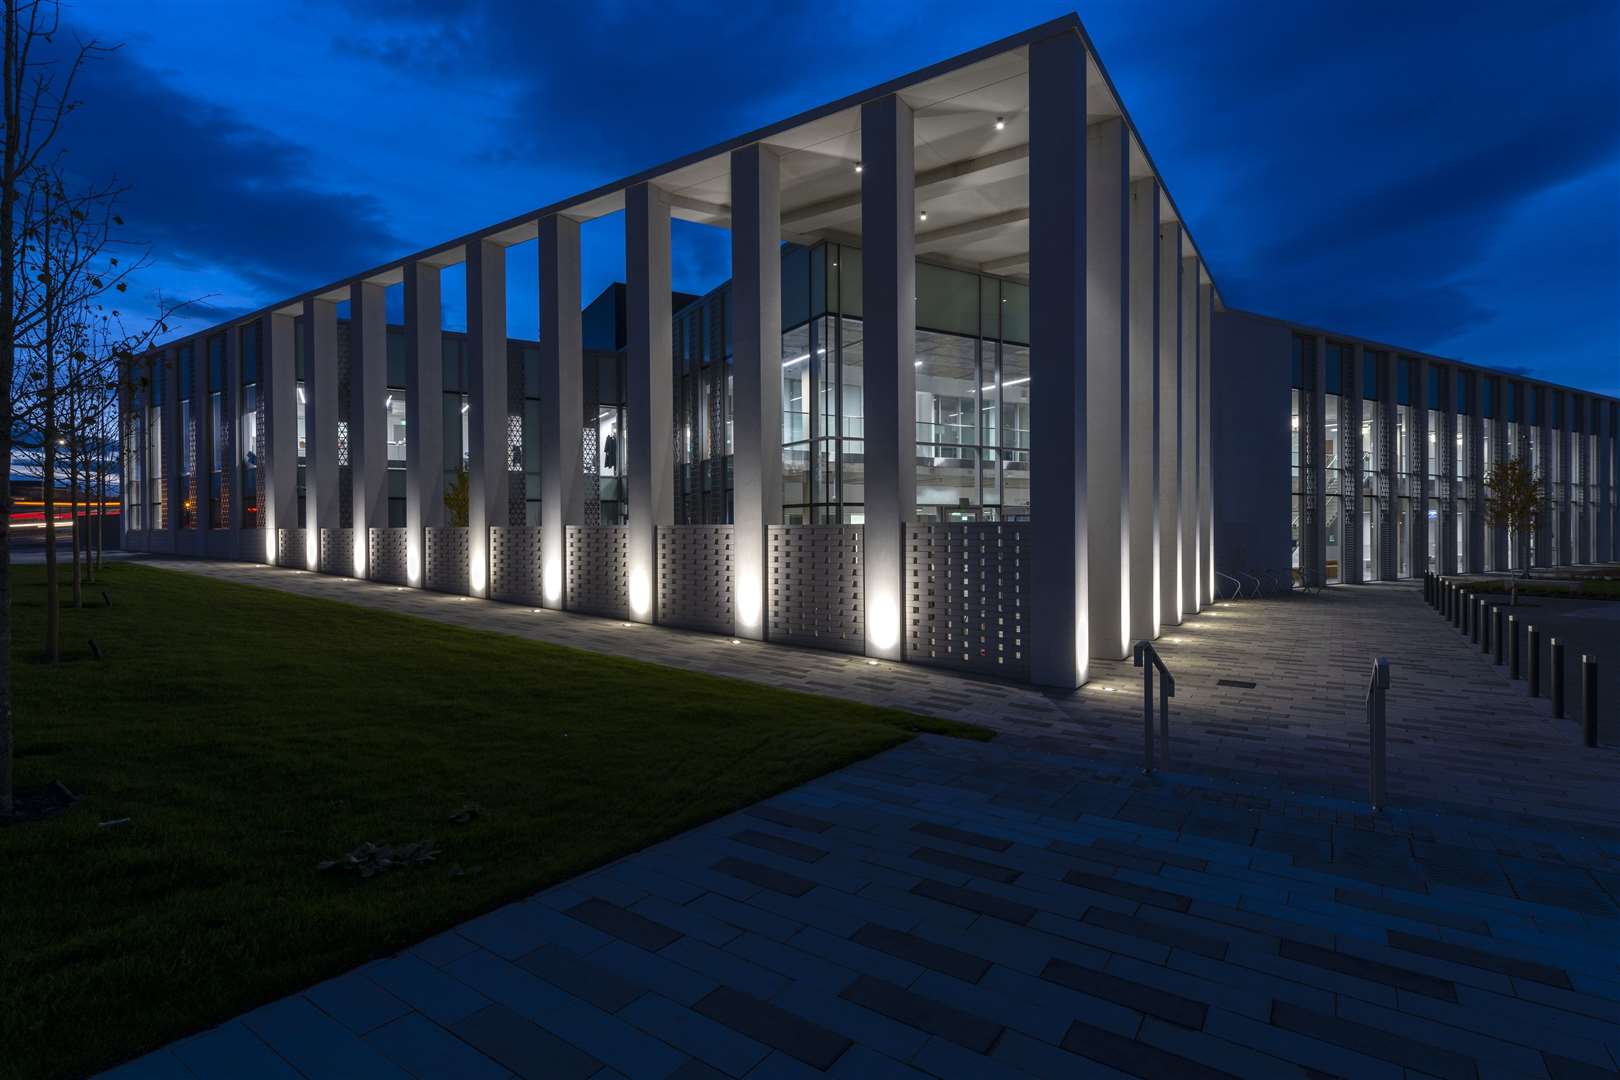 Inverness's new Justice Centre. Photograph: John Paul.